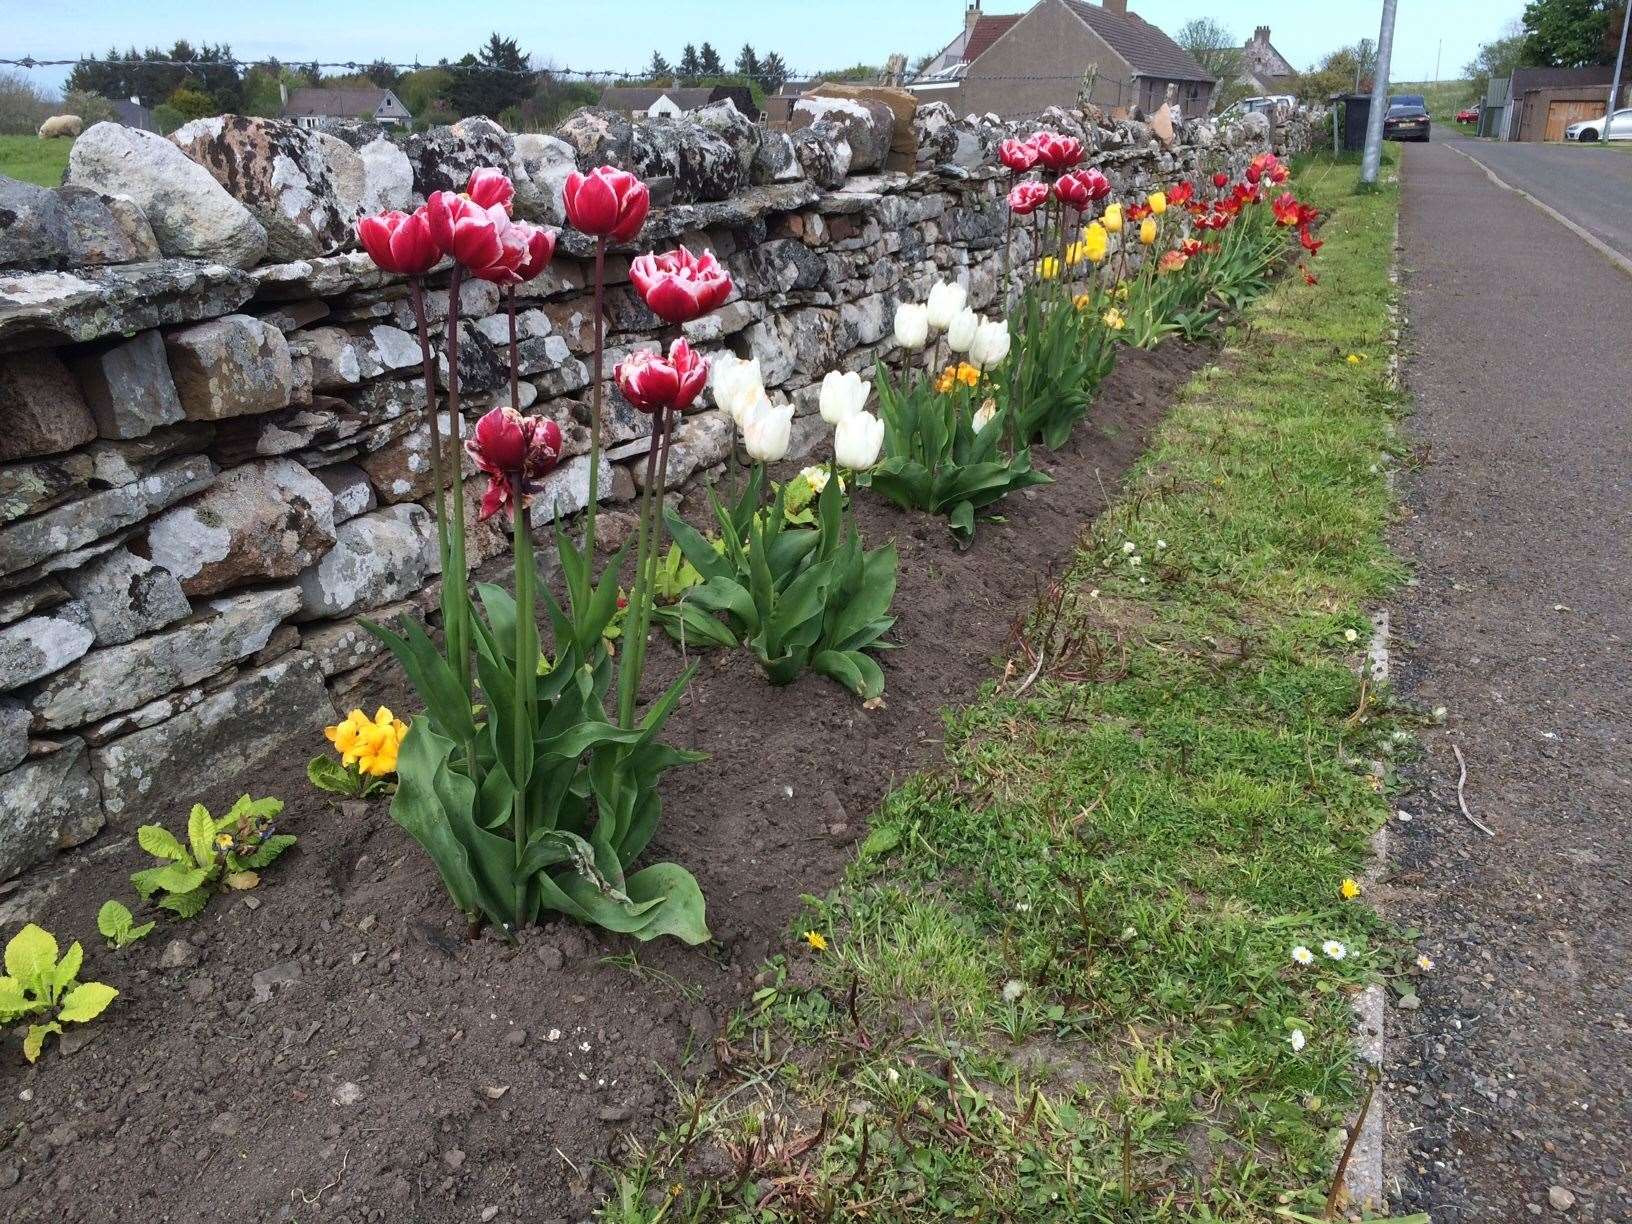 A colourful display of tulips at The Terrace, Reay.